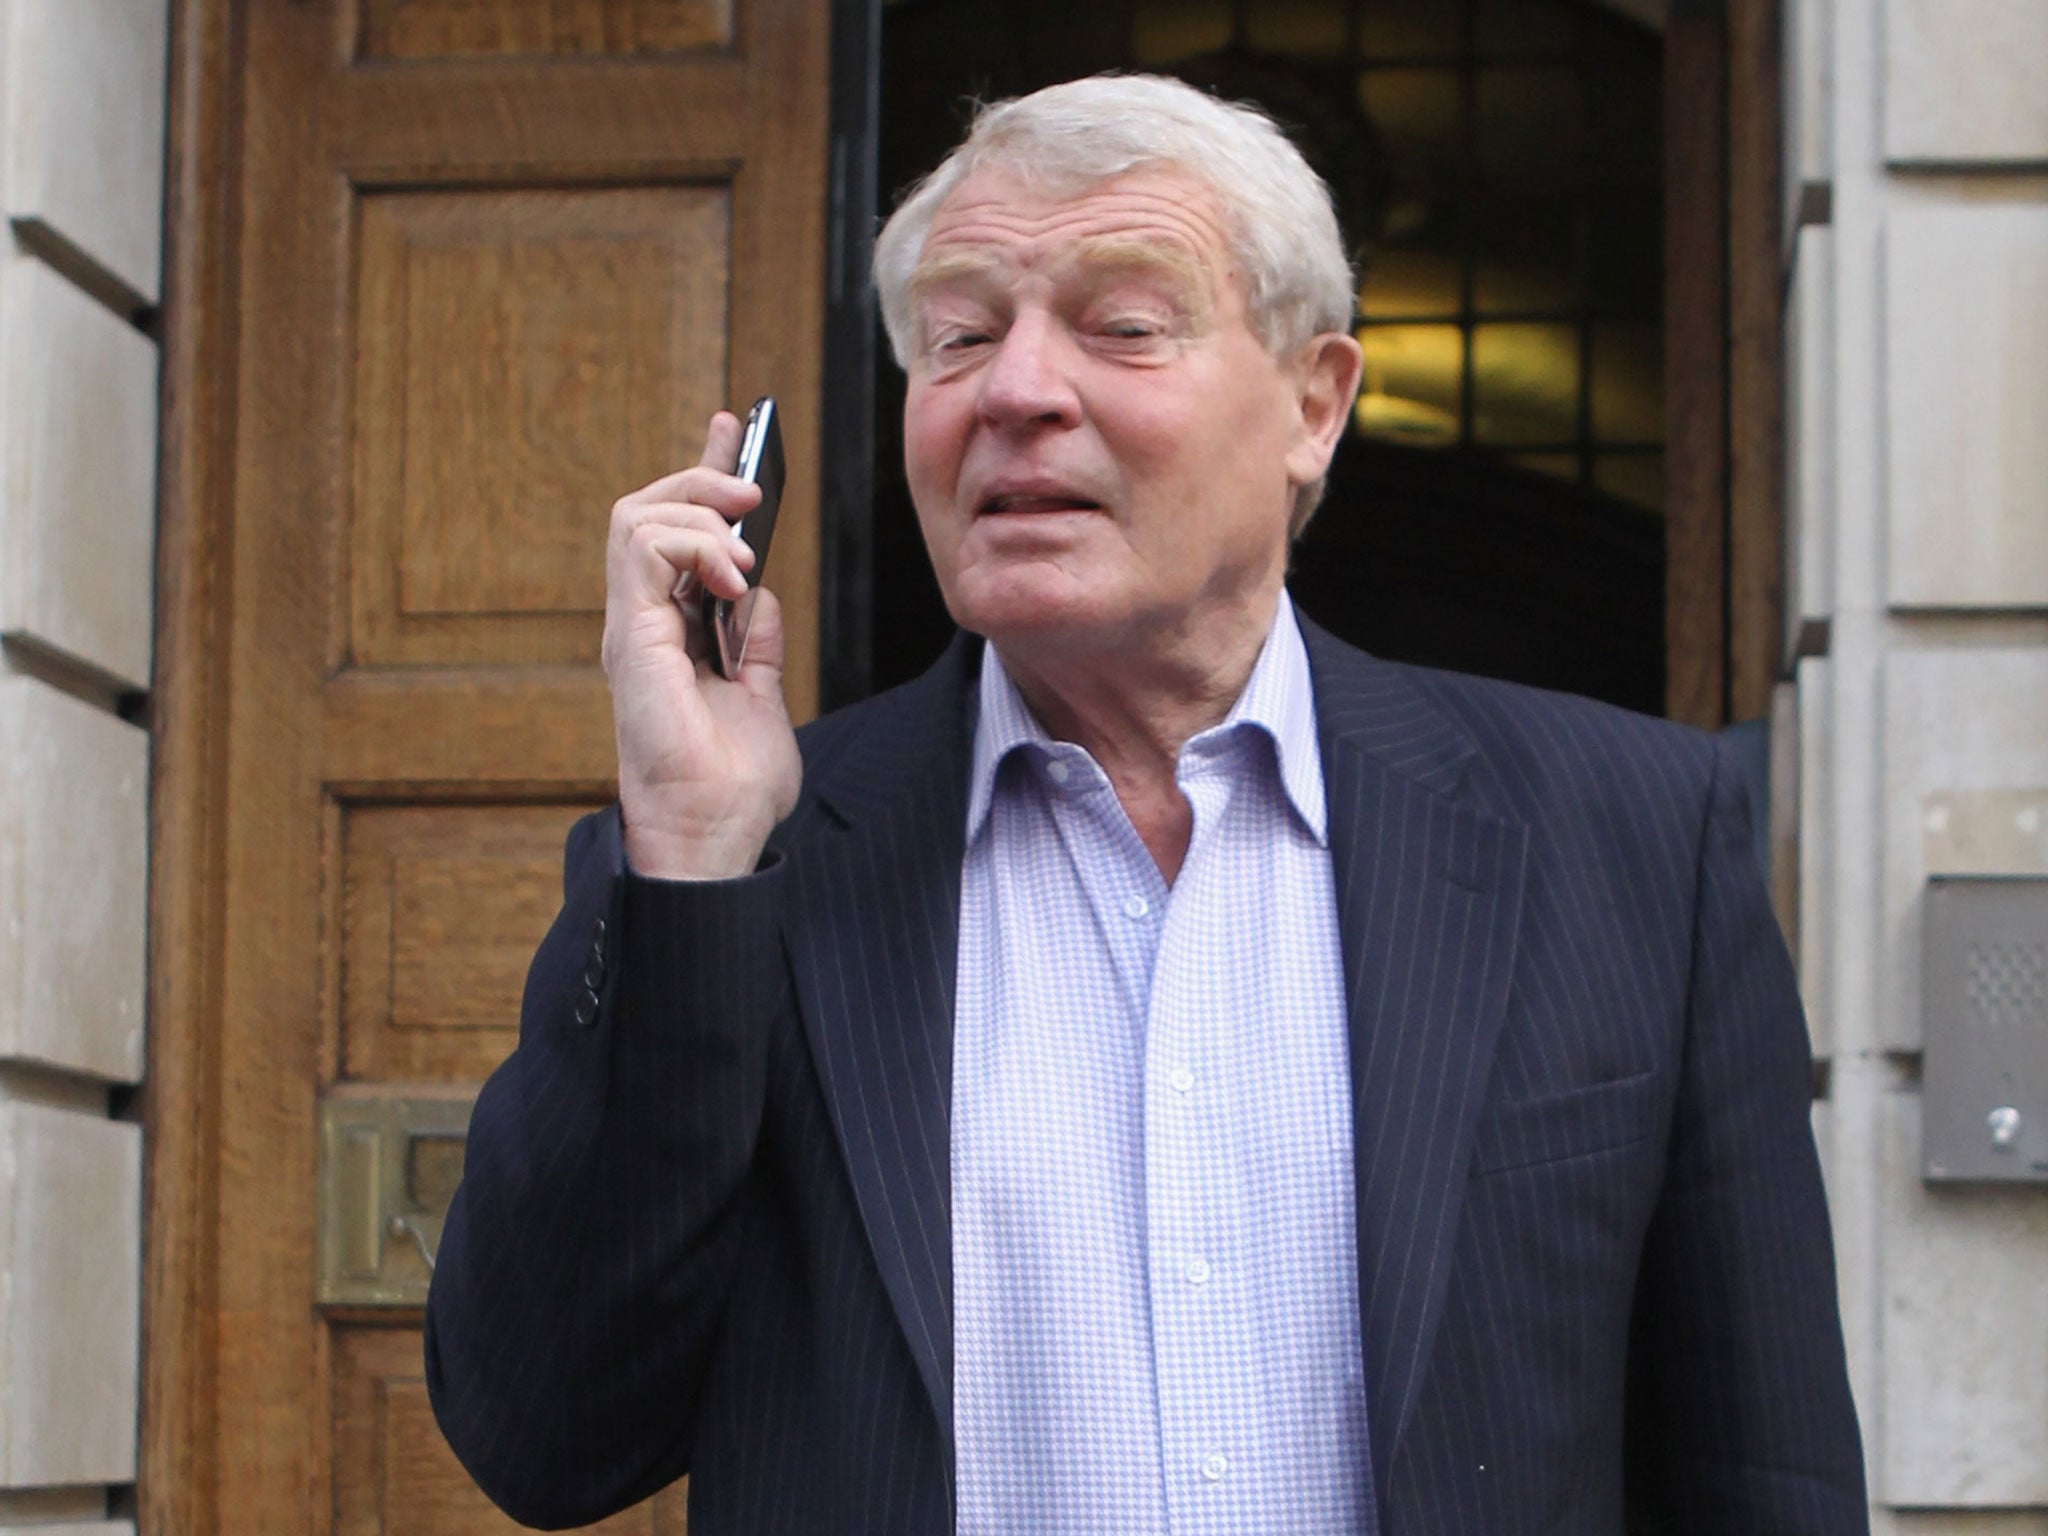 The Soho Voices voiceover agency praised Lord Ashdown’s ‘calm, distinctive tones’